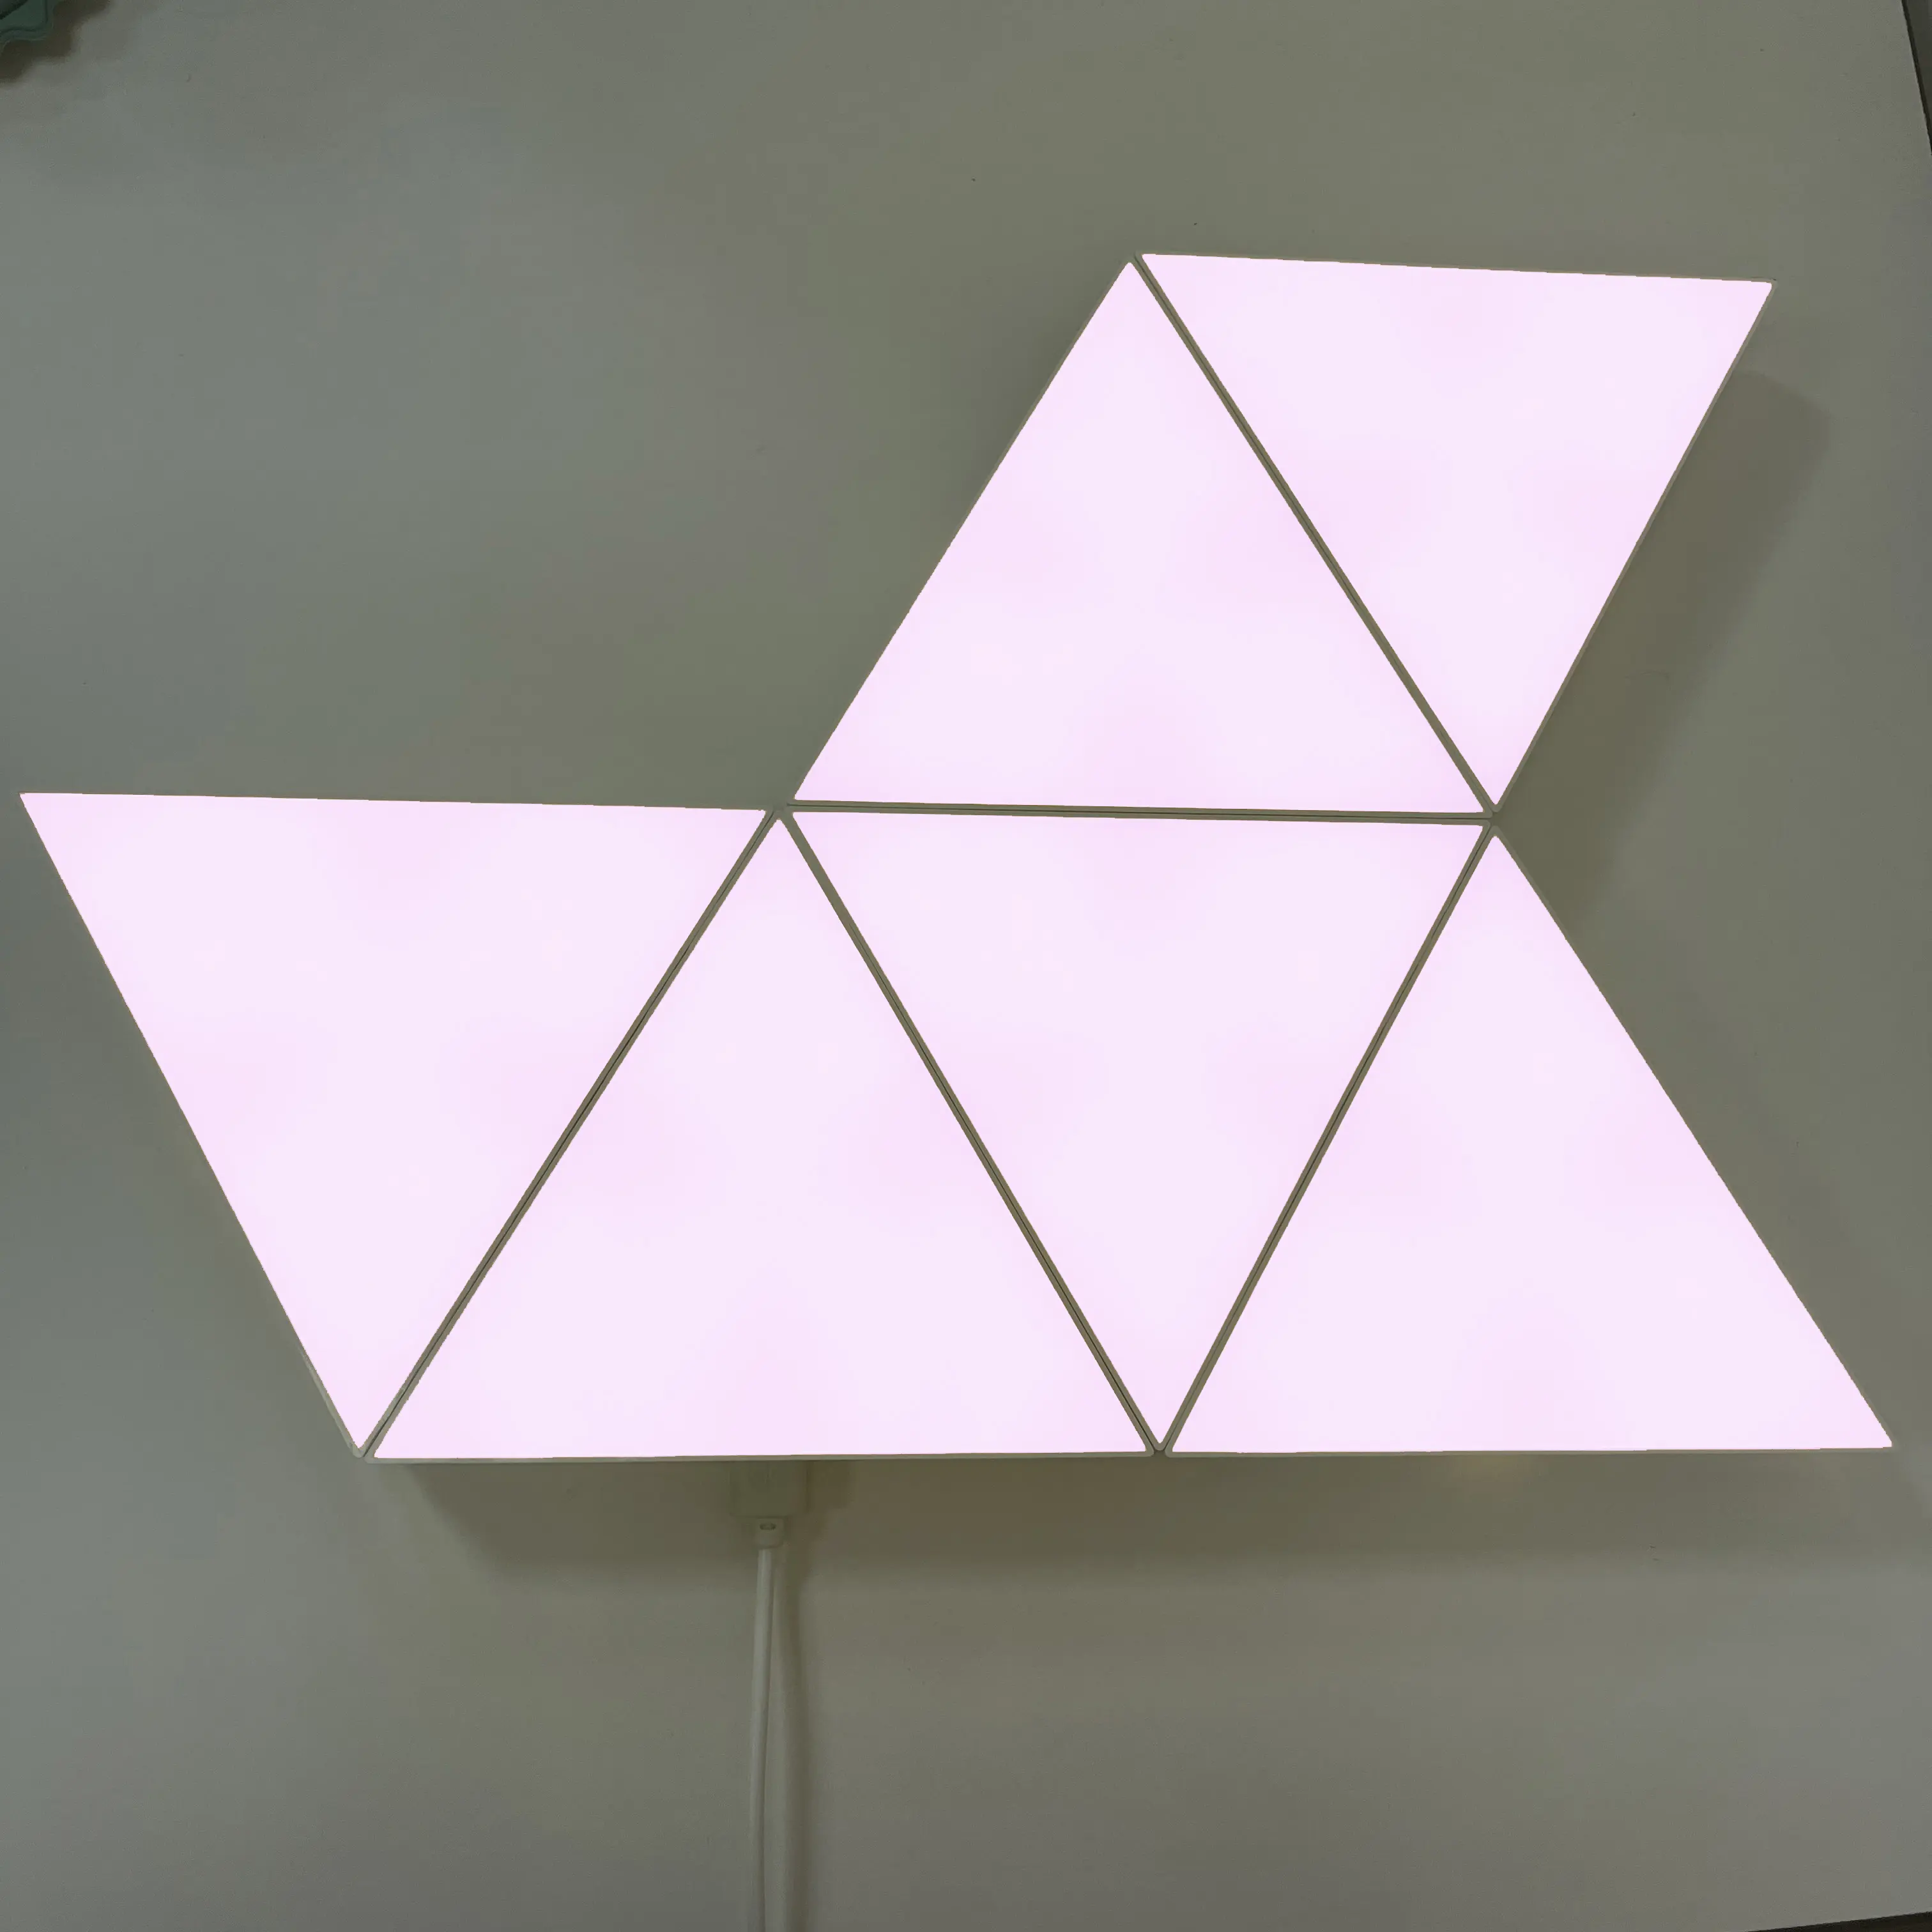 Triangle Lights Panels Smart LED smart control game sync RGB Voice Control APP controlled lamp